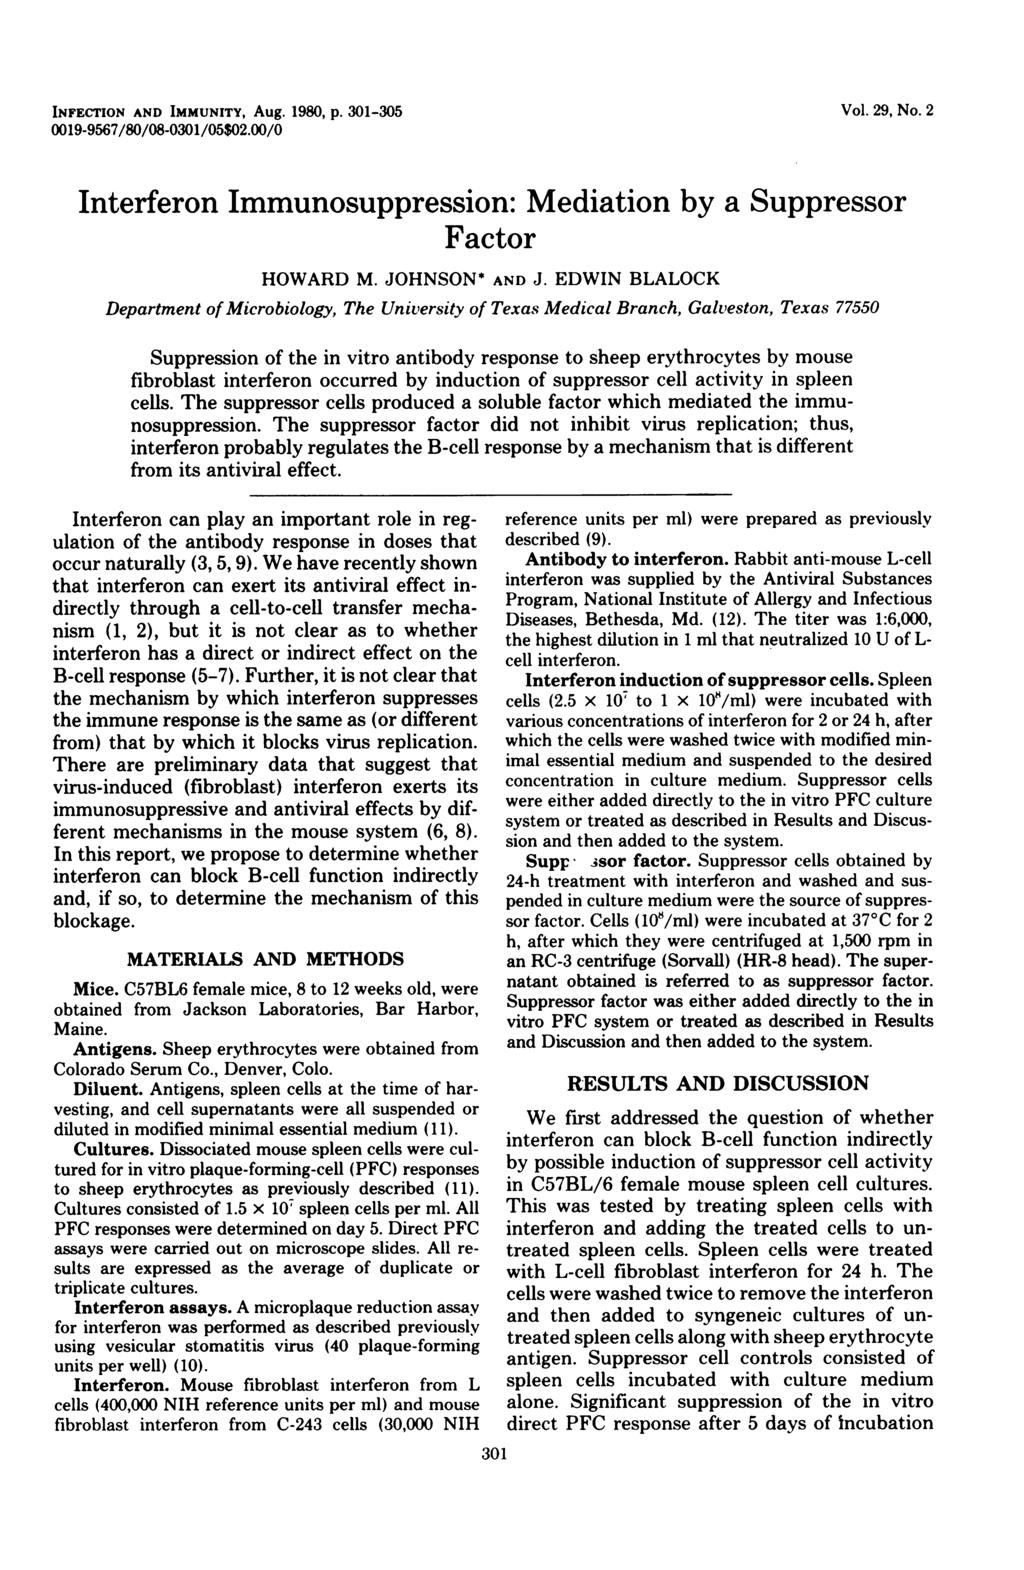 INFECTION AND IMMUNITY, Aug. 1980, p. 301-305 0019-9567/80/08-0301/05$02.00/0 Vol. 29, No. 2 Interferon Immunosuppression: Mediation by a Suppressor Factor HOWARD M. JOHNSON* AND J.